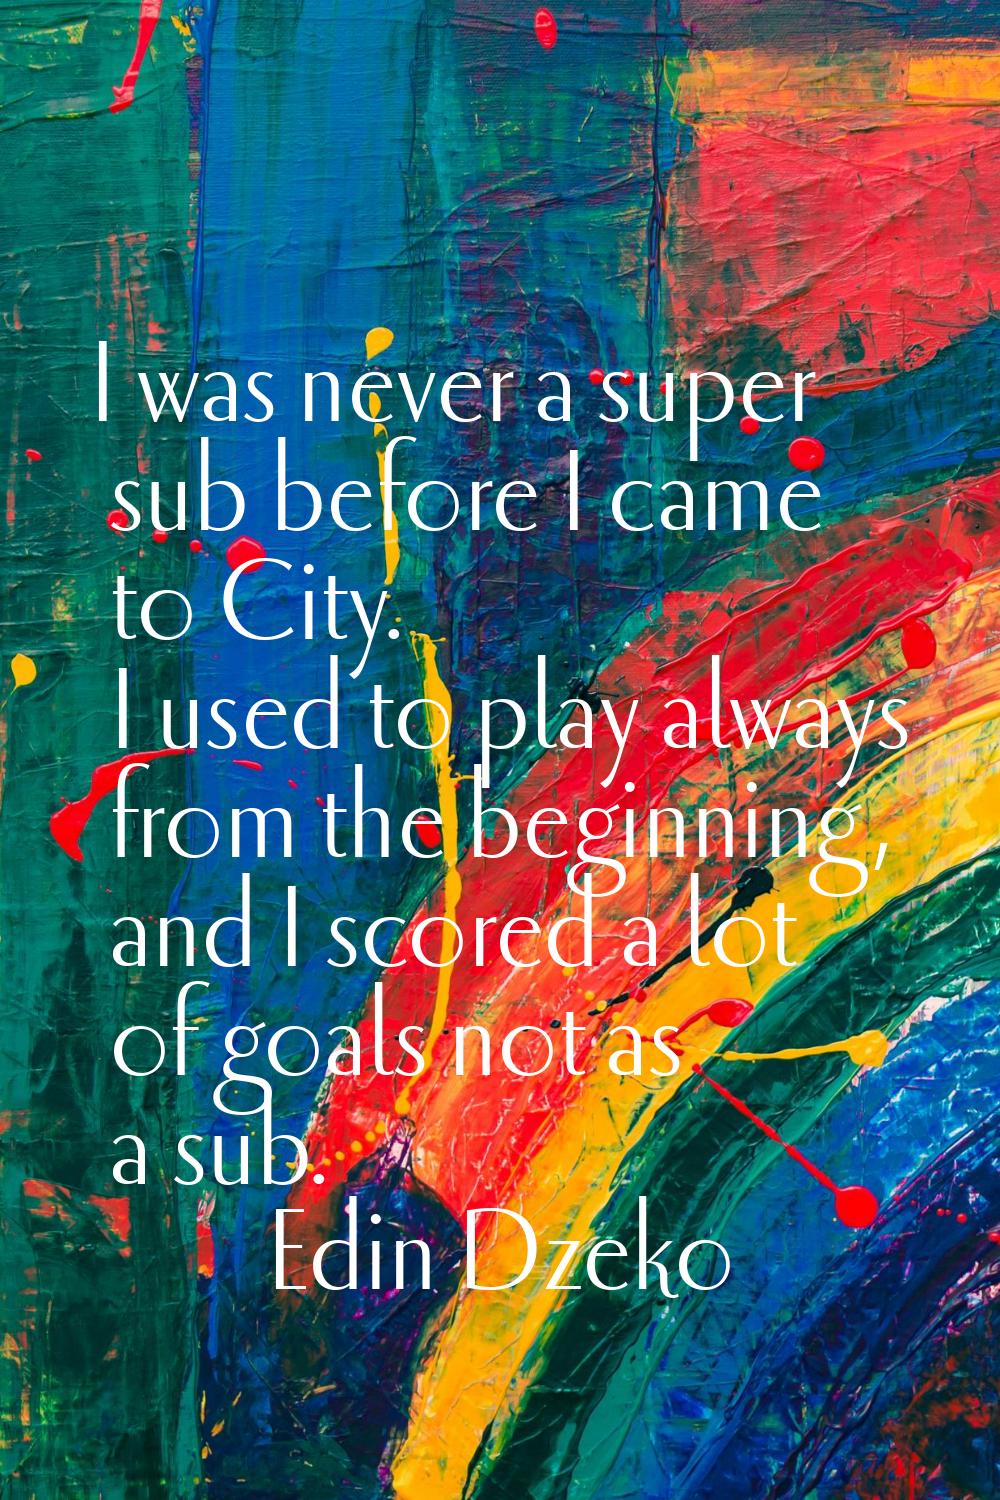 I was never a super sub before I came to City. I used to play always from the beginning, and I scor